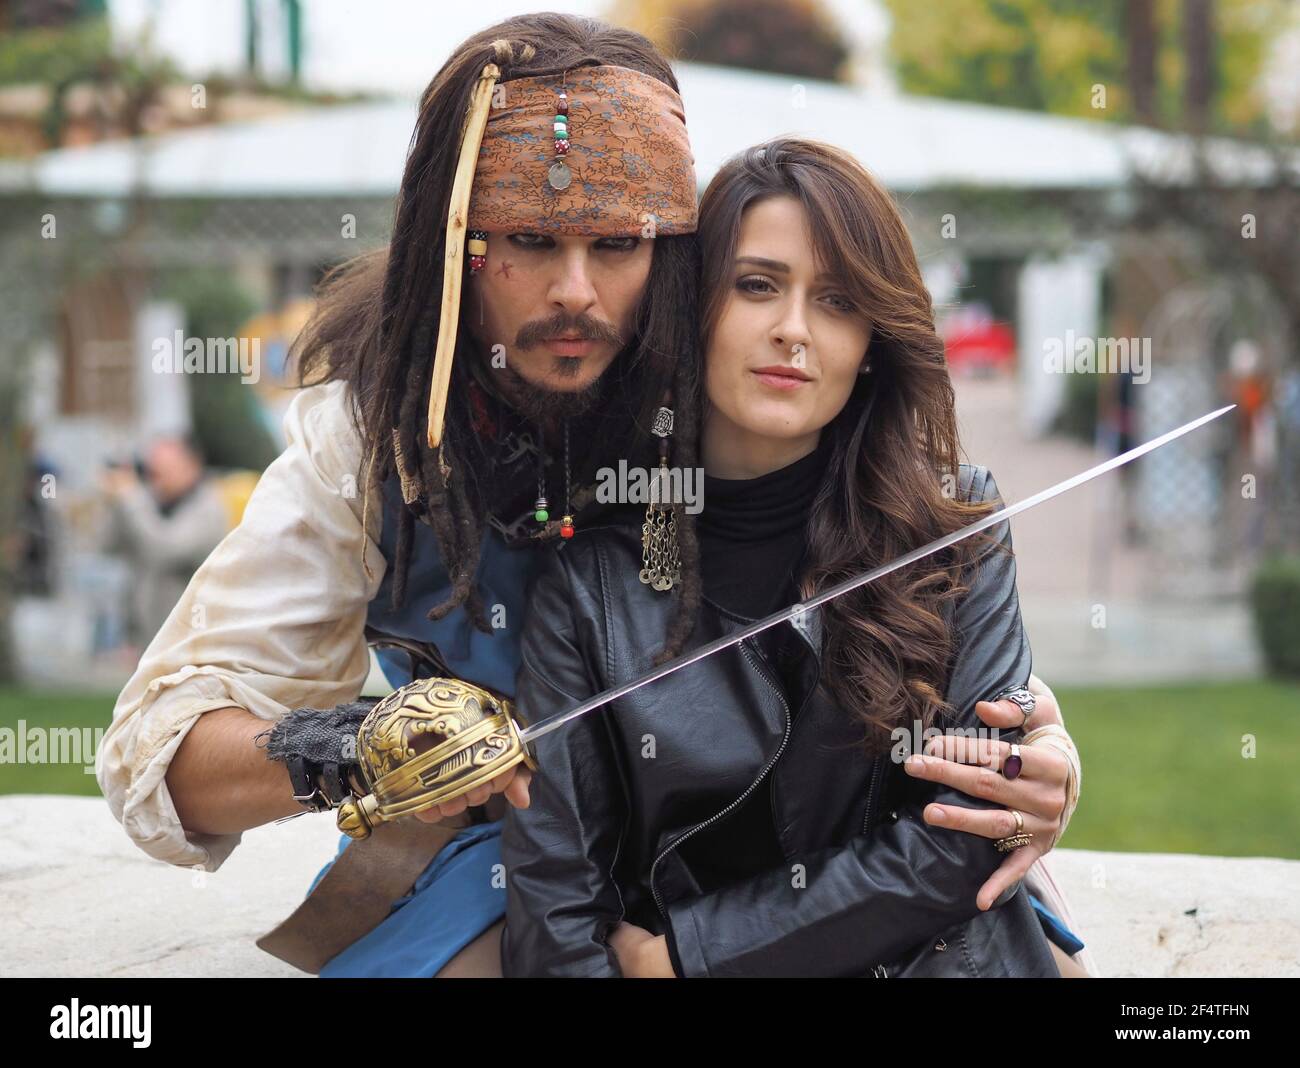 Actors posing for photographers in person cosplay 'Captain Jack Sparrow' from Pirates of the Caribbean Stock Photo